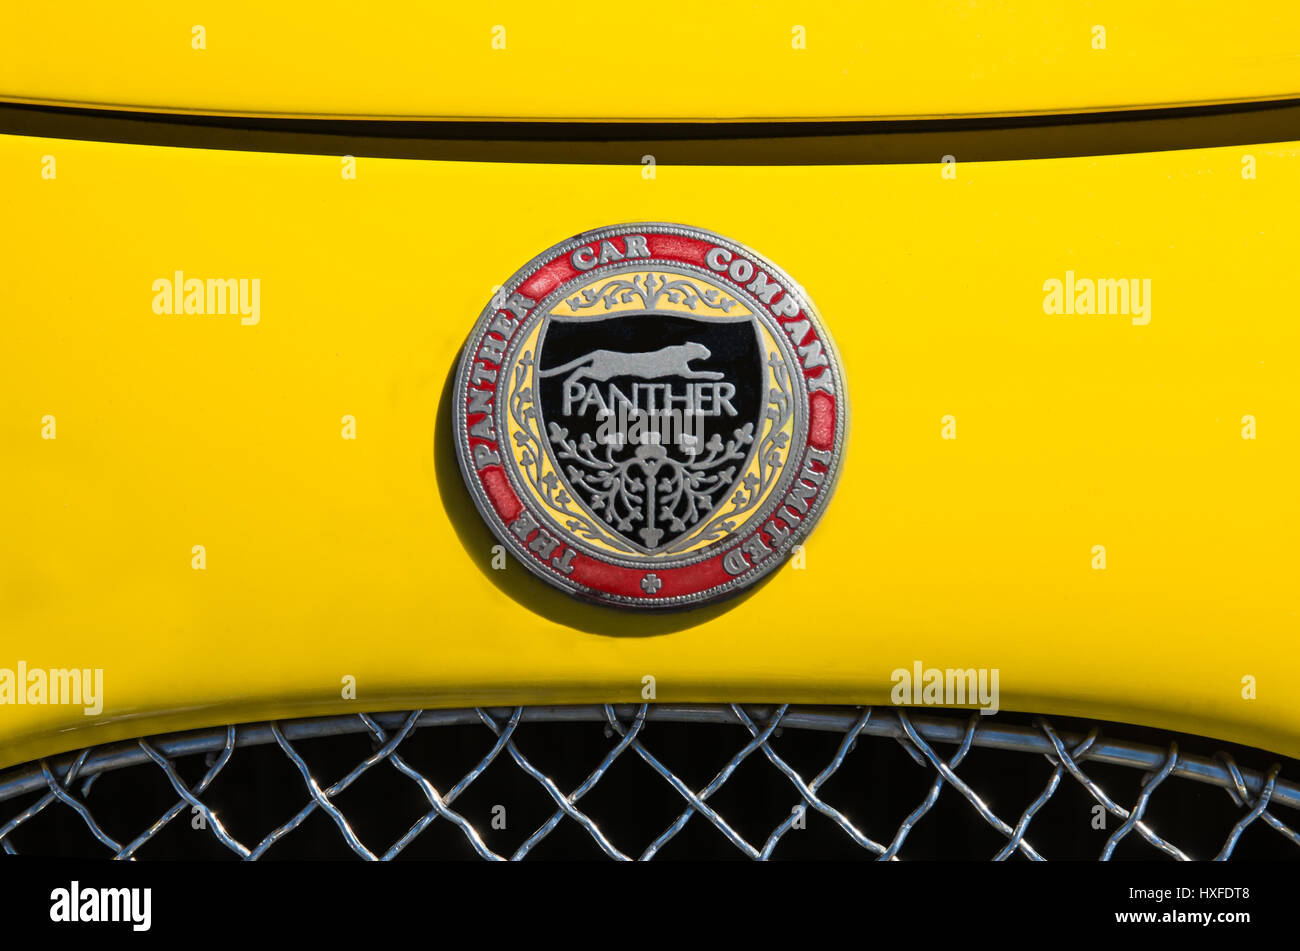 The Panther Car Company Limited Badge, Logo on the front of a Yellow Car. Stock Photo